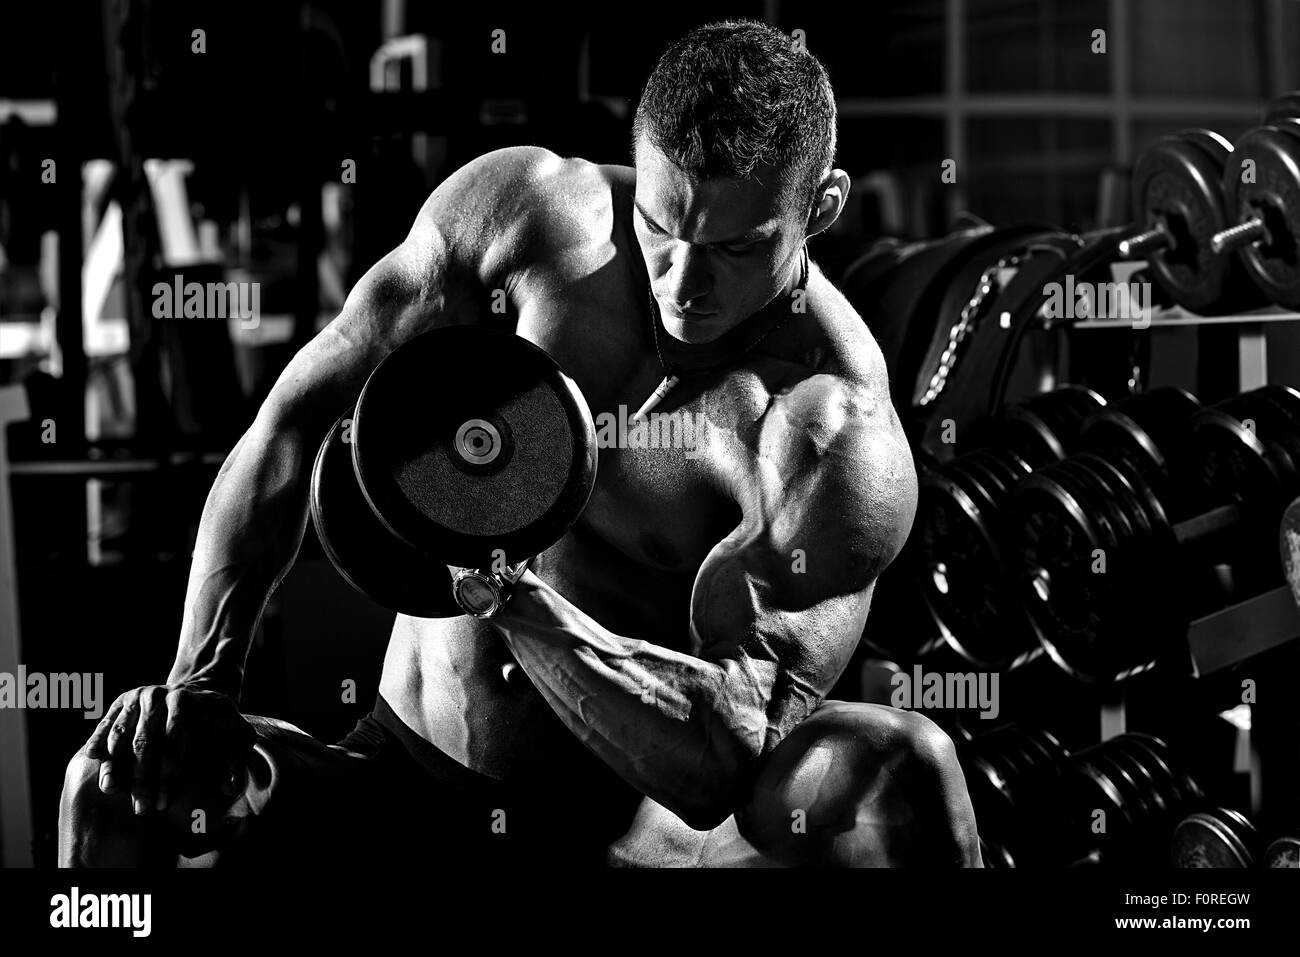 very power athletic guy bodybuilder ,  execute exercise with  dumbbells, in dark gym, black and white photo Stock Photo